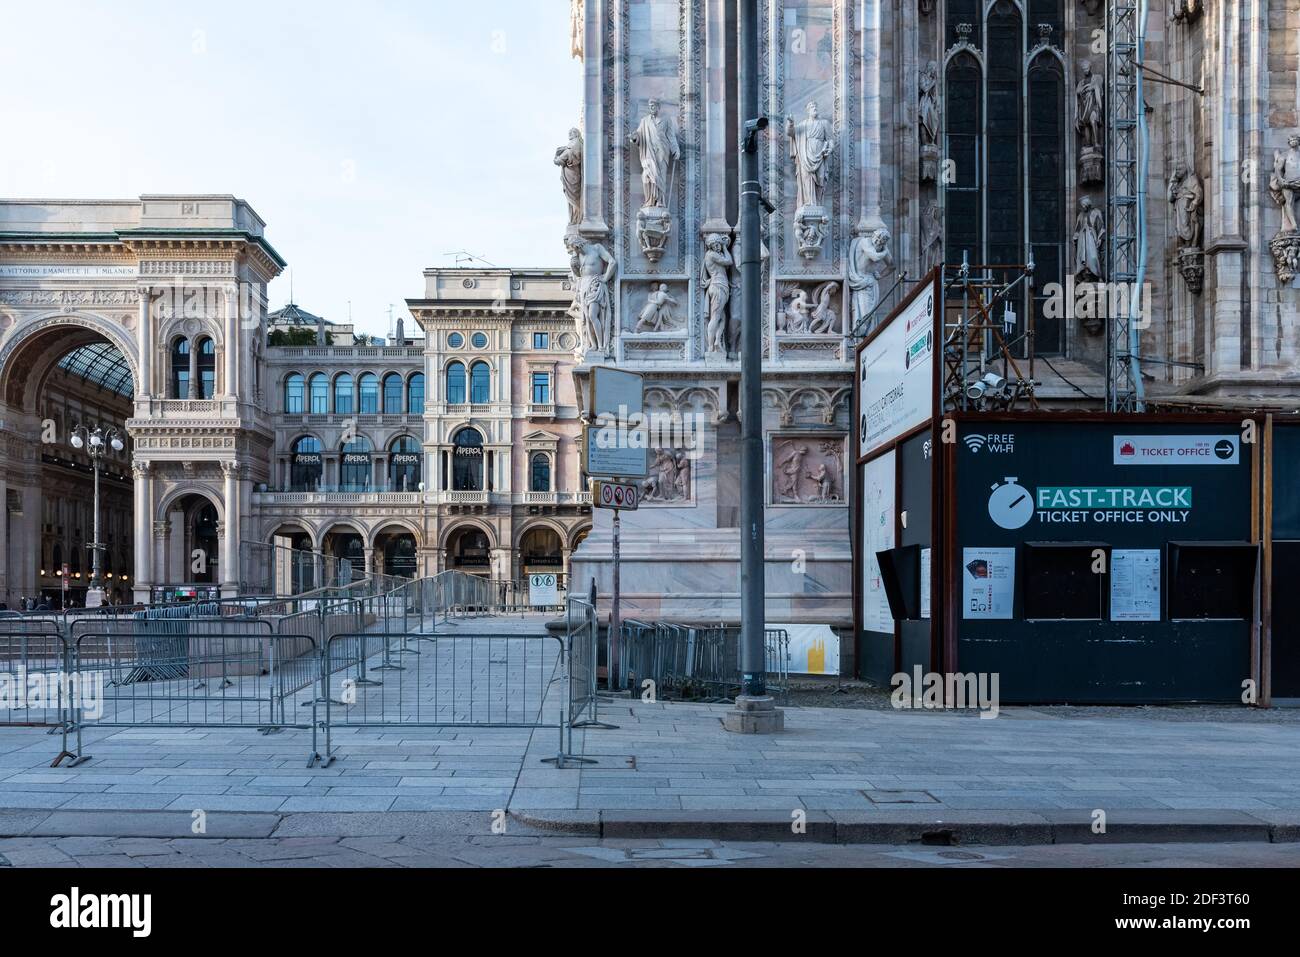 Duomo's ticket office is closed, there is still the space for the line, but not the line . Rome, Italy on March 10, 2020. The death toll in Italy from the coronavirus COVID-19 surged to 631 on Tuesday after 168 more fatalities were confirmed in the last 24 hours, according to the officials. The Italian Government imposed travel restrictions and a ban on public gatherings to help fight the spread of a disease that has infected 10 149 people in the Mediterranean country in just over two weeks. Photo by Enza Tamborra/ABACAPRESS.COM Stock Photo